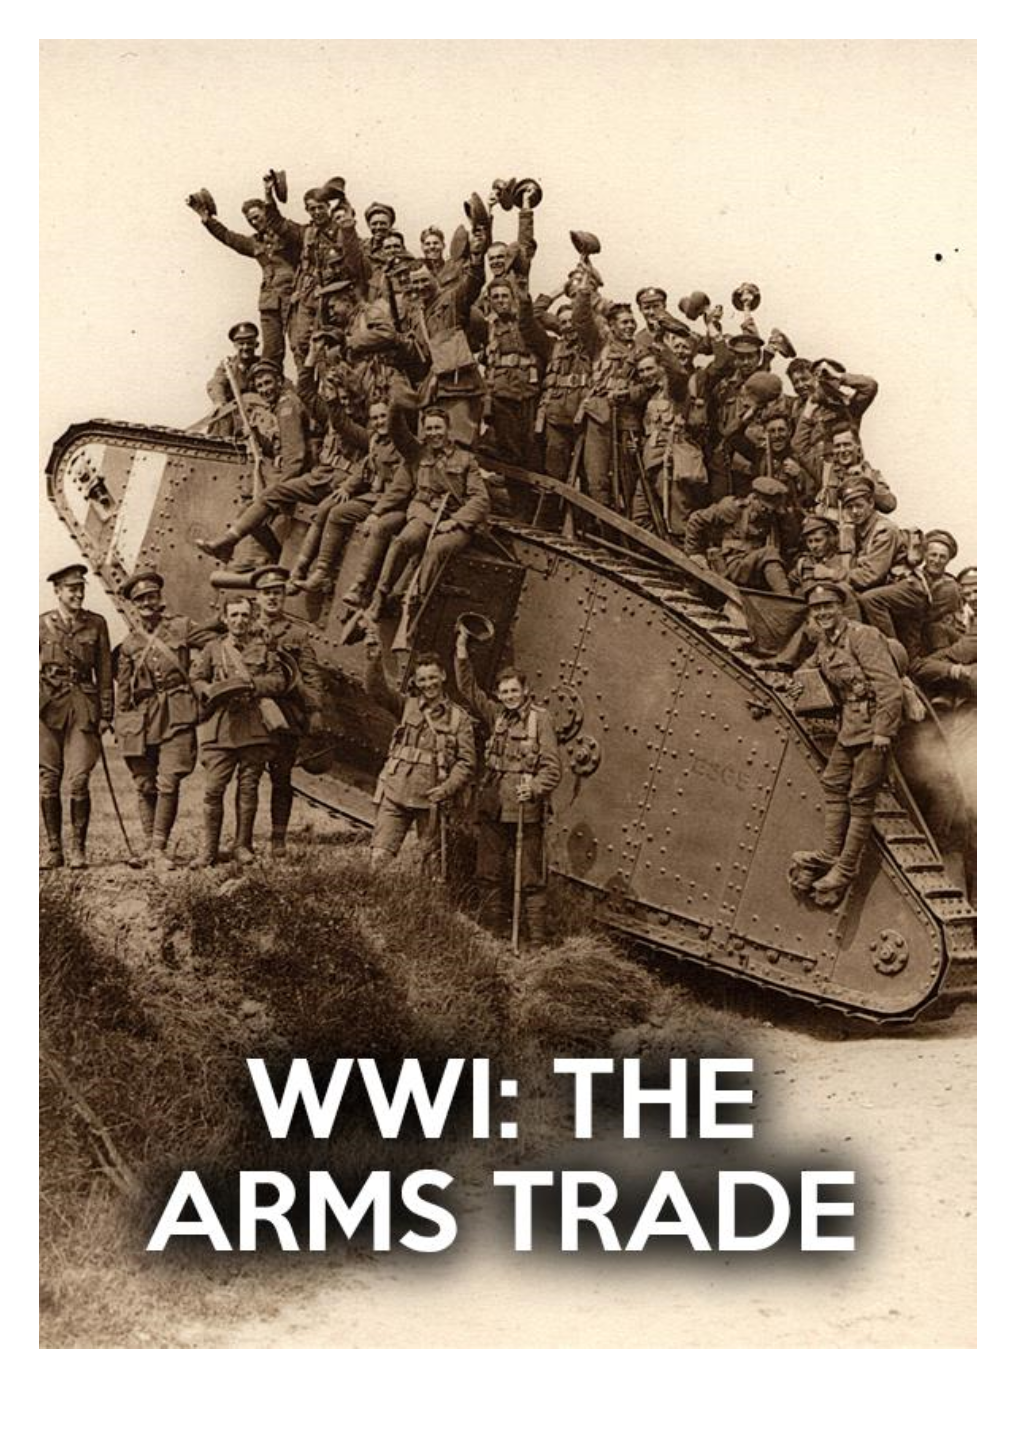 WWI and the Arms Trade